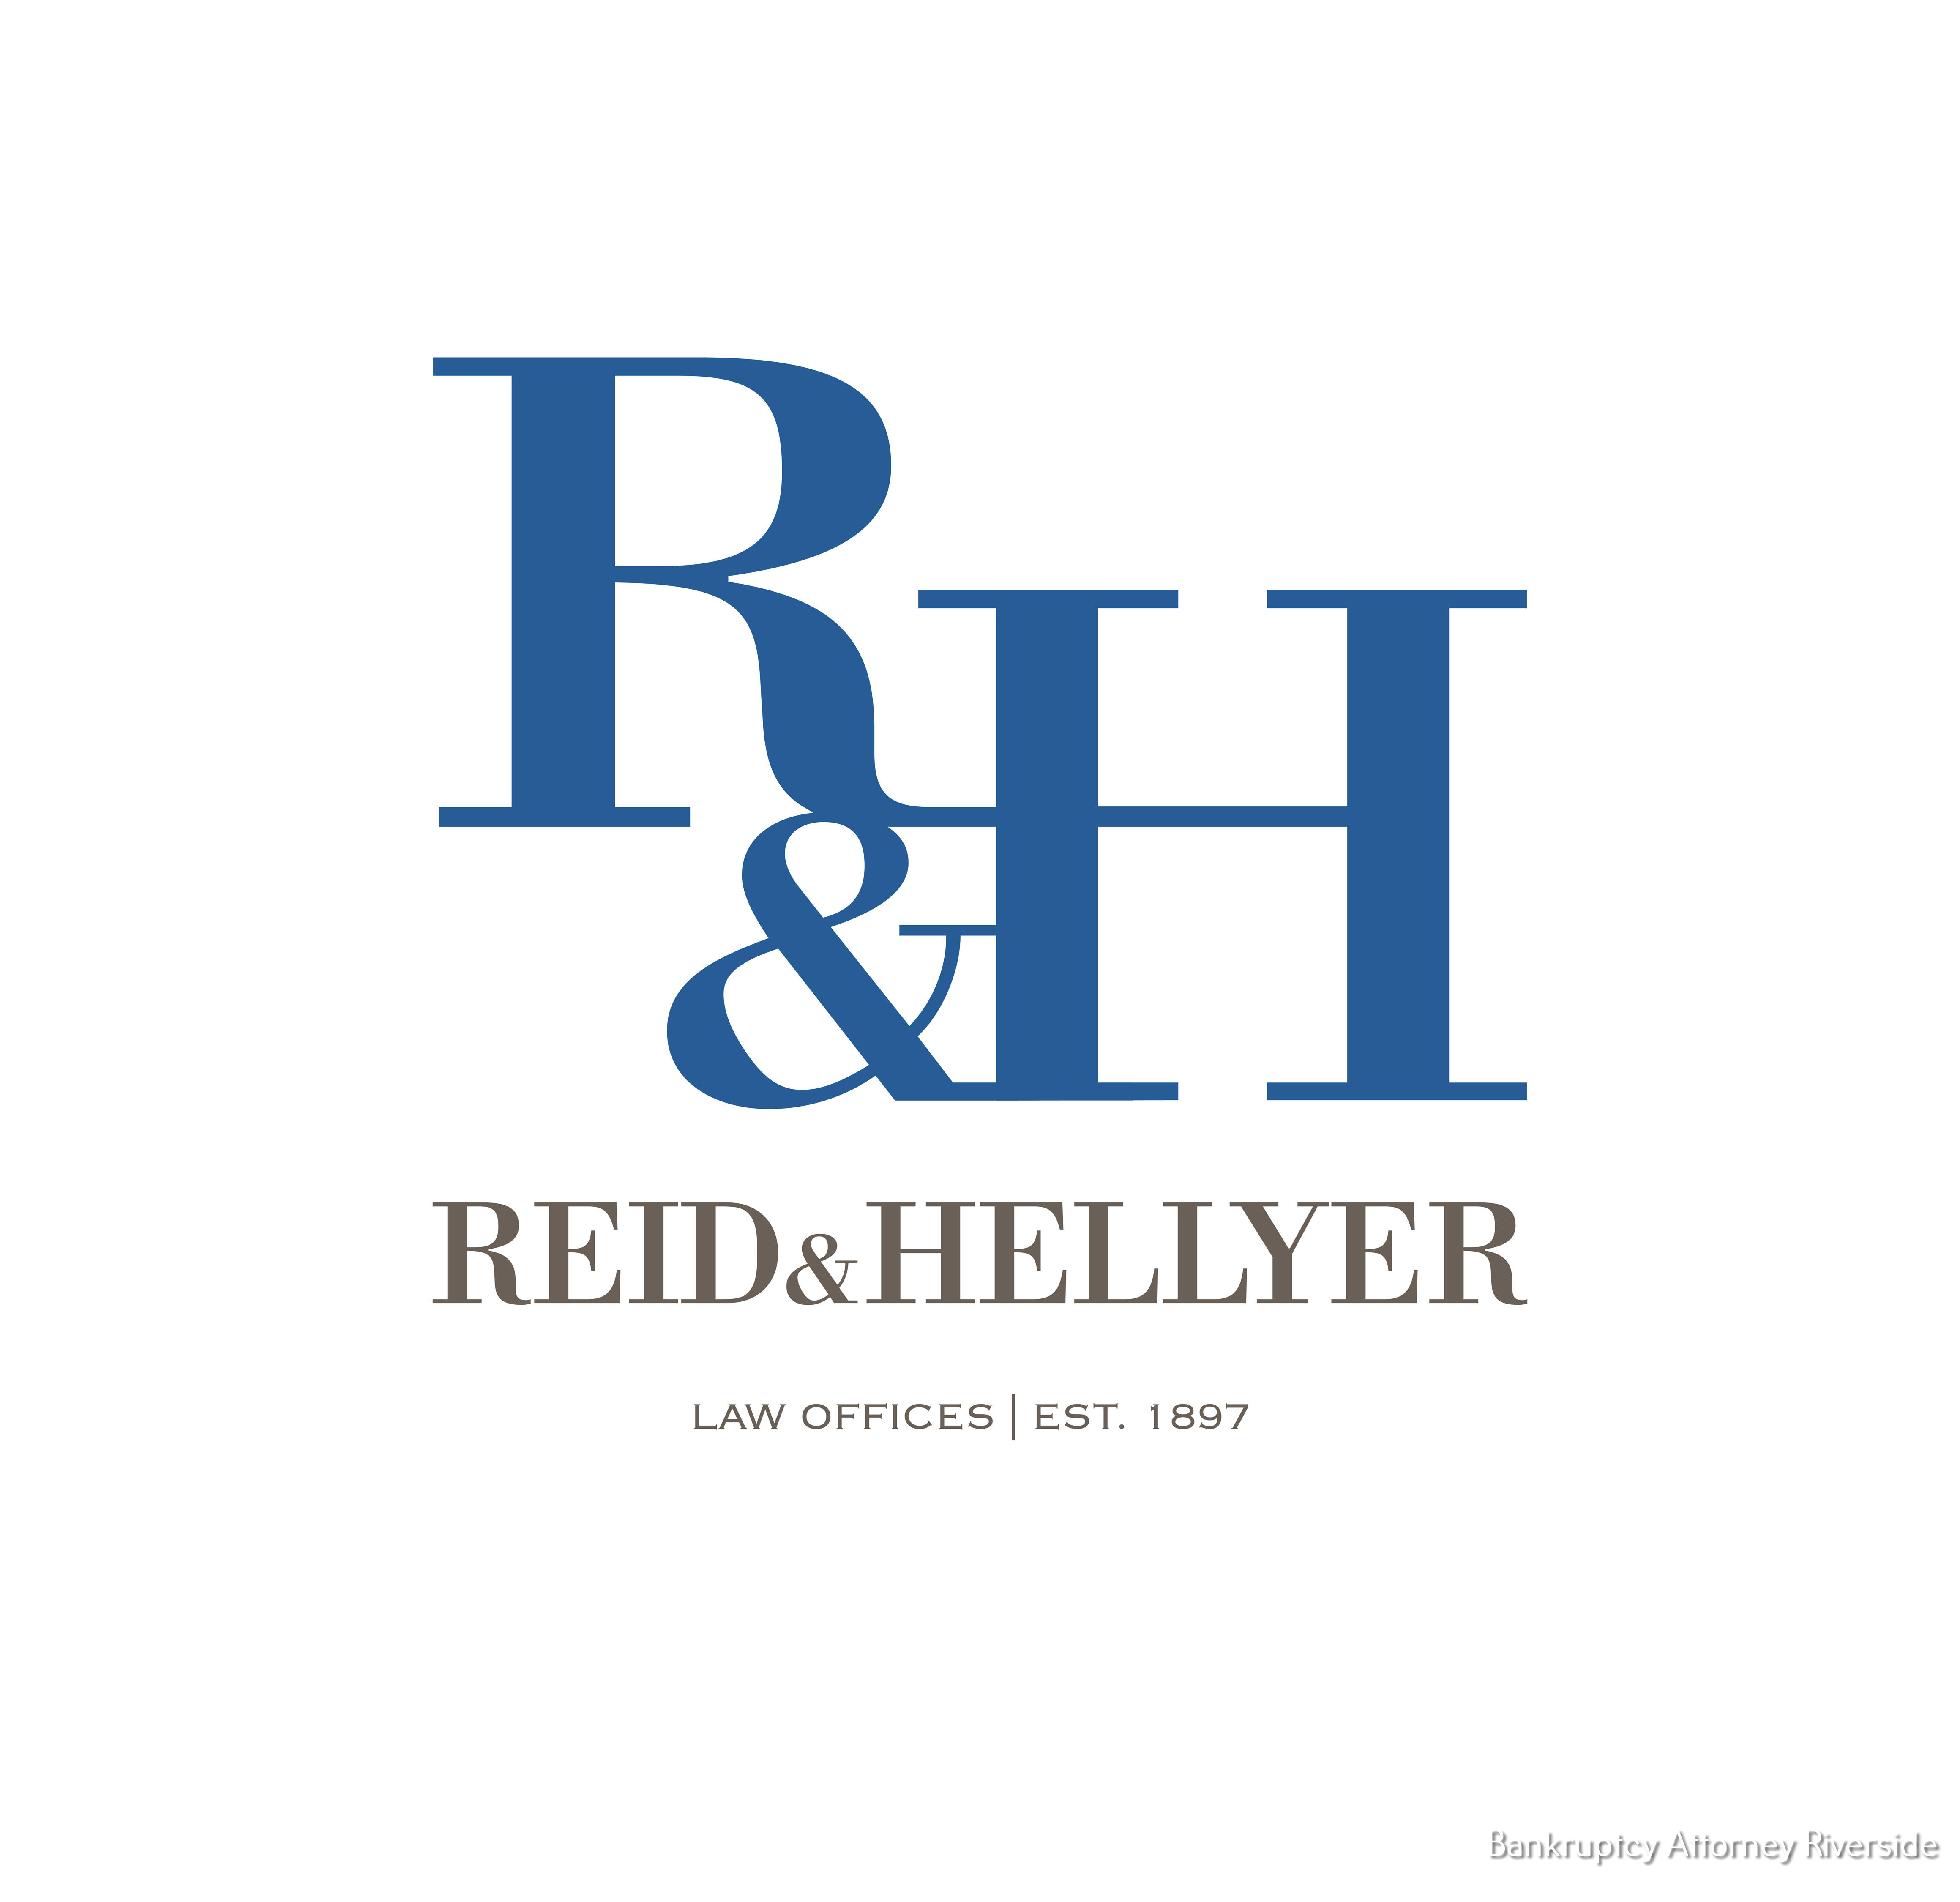 Reid & Hellyer Answers Commonly Asked Questions about Business Litigation